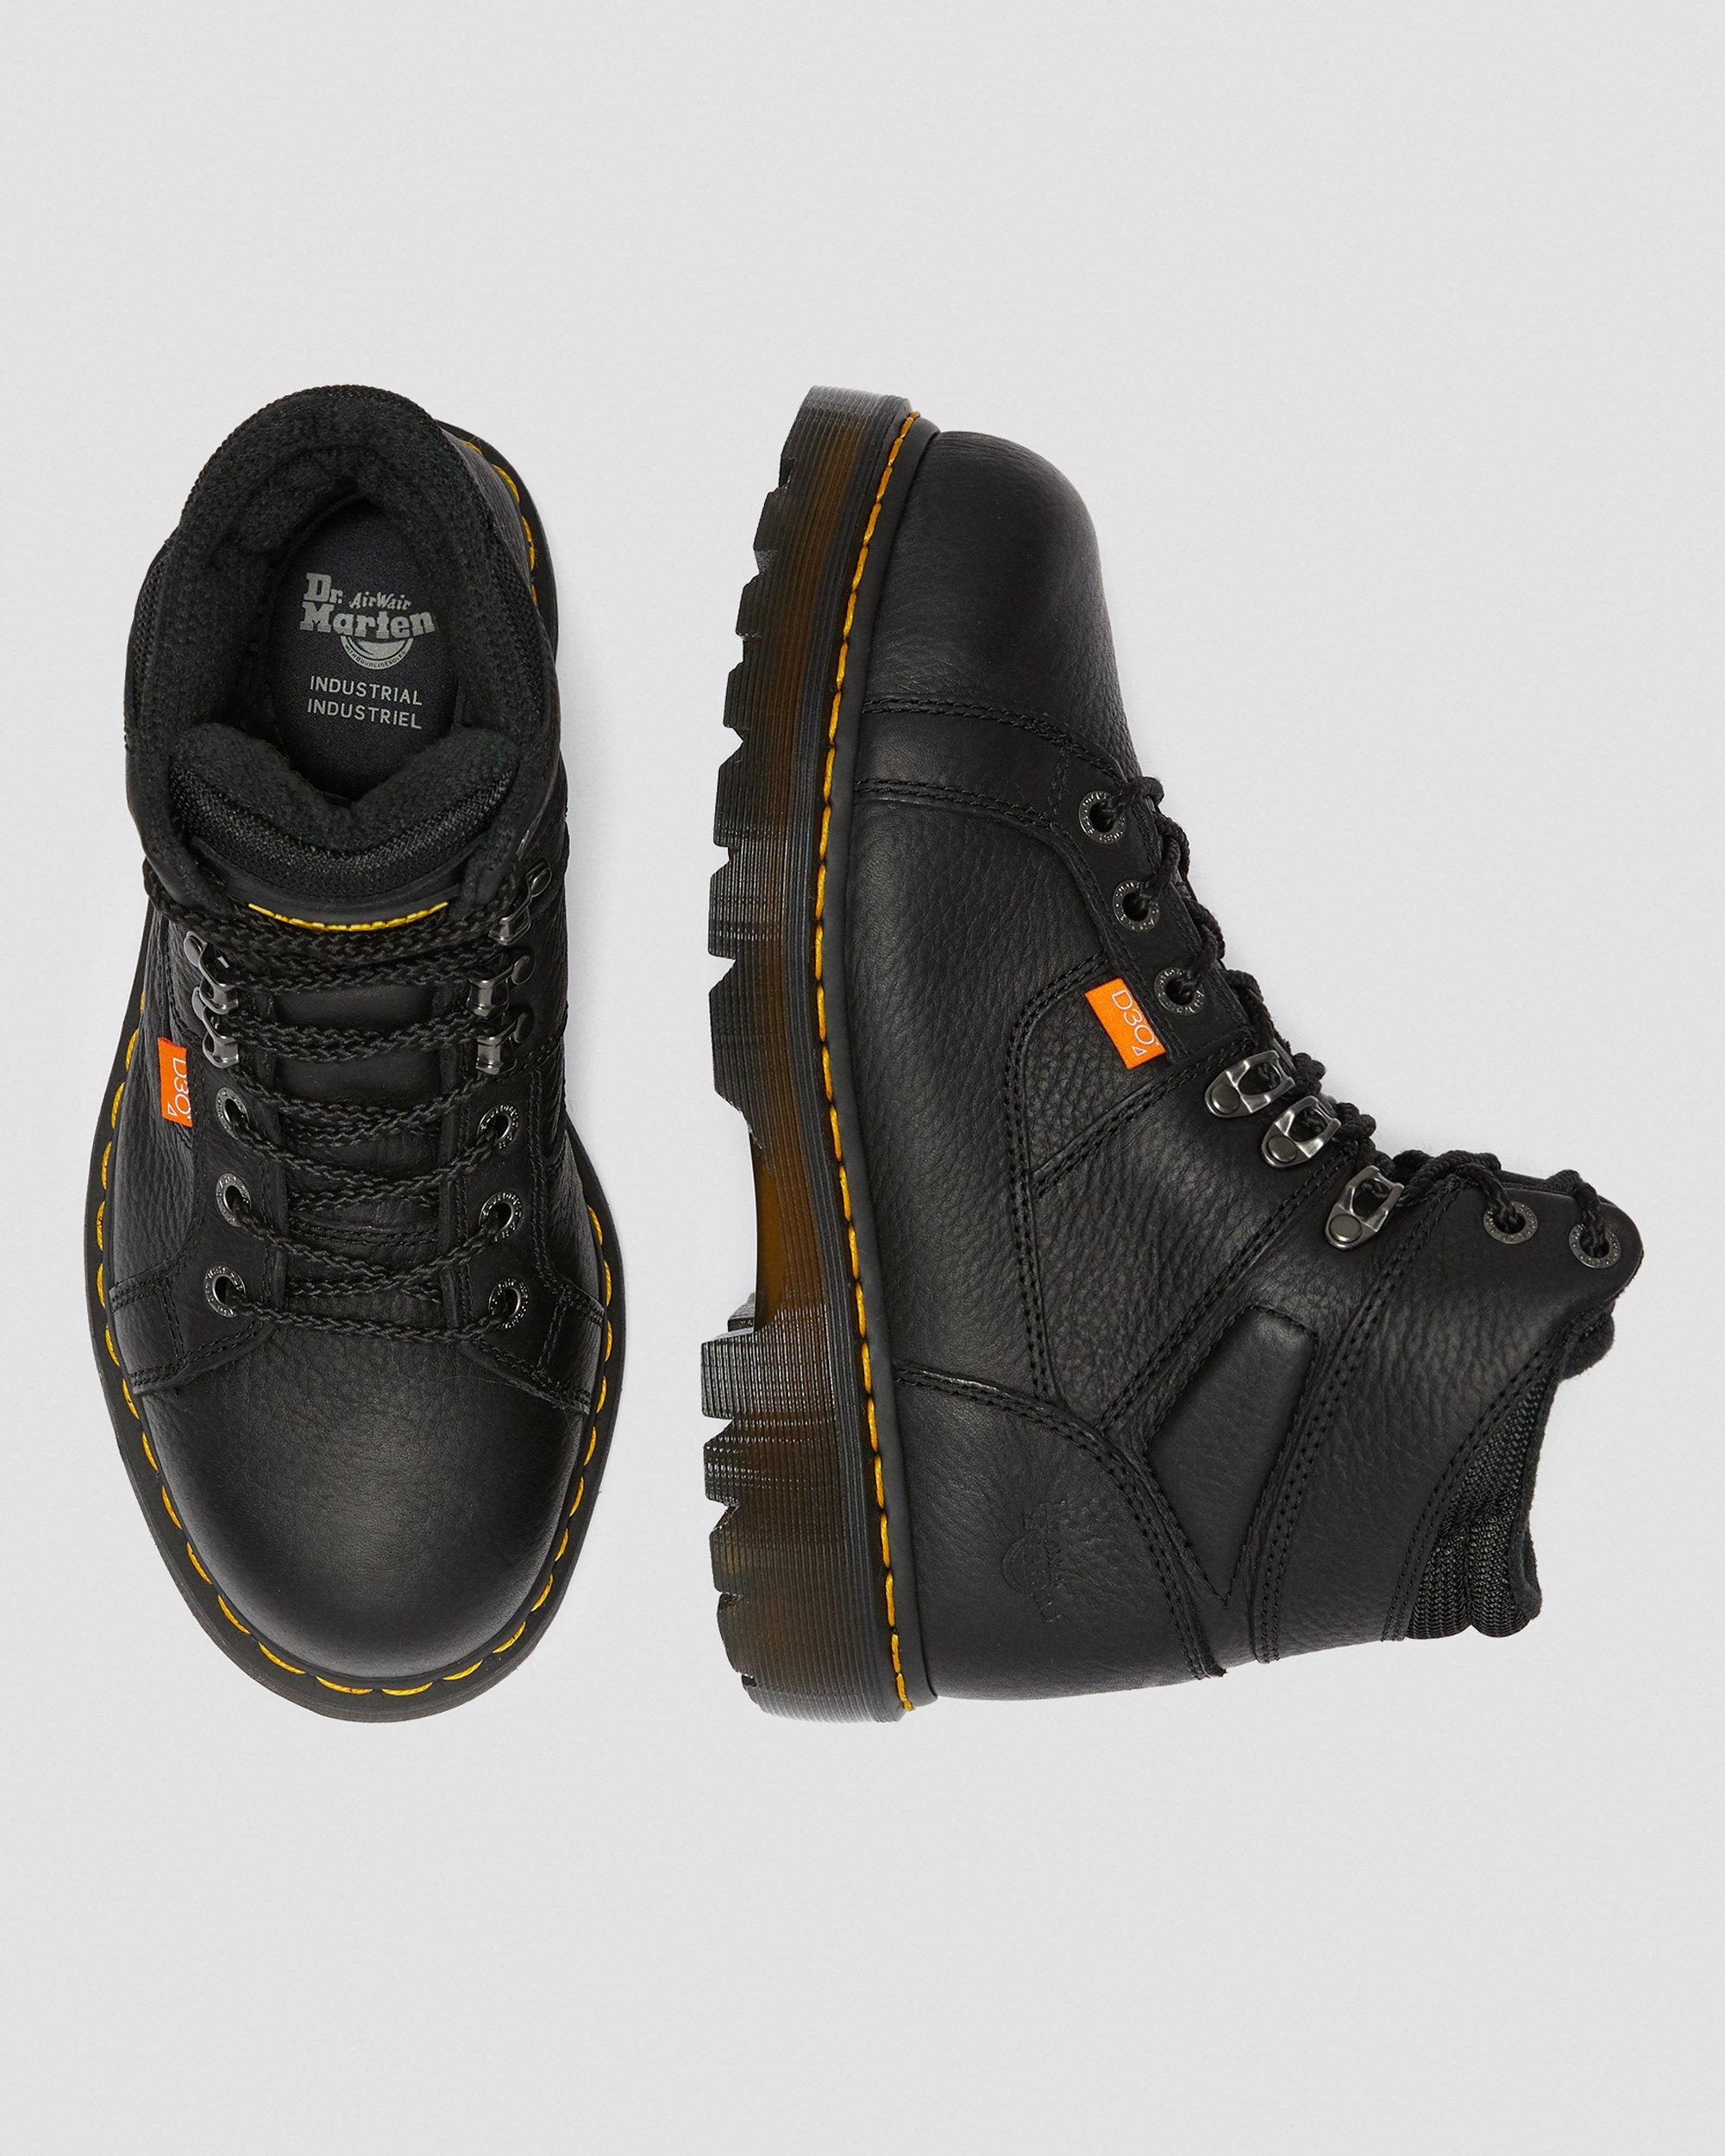 Ironbridge Extra Wide Grizzly Met Guard Work Boots Dr. Martens